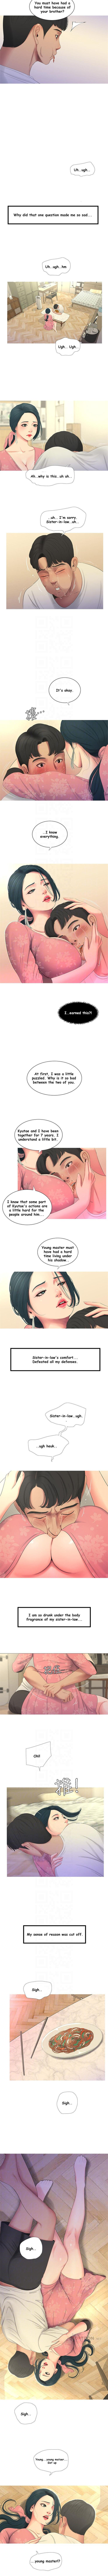 One's In-Laws Virgins Chapter 1-15 (Ongoing) [English] 31